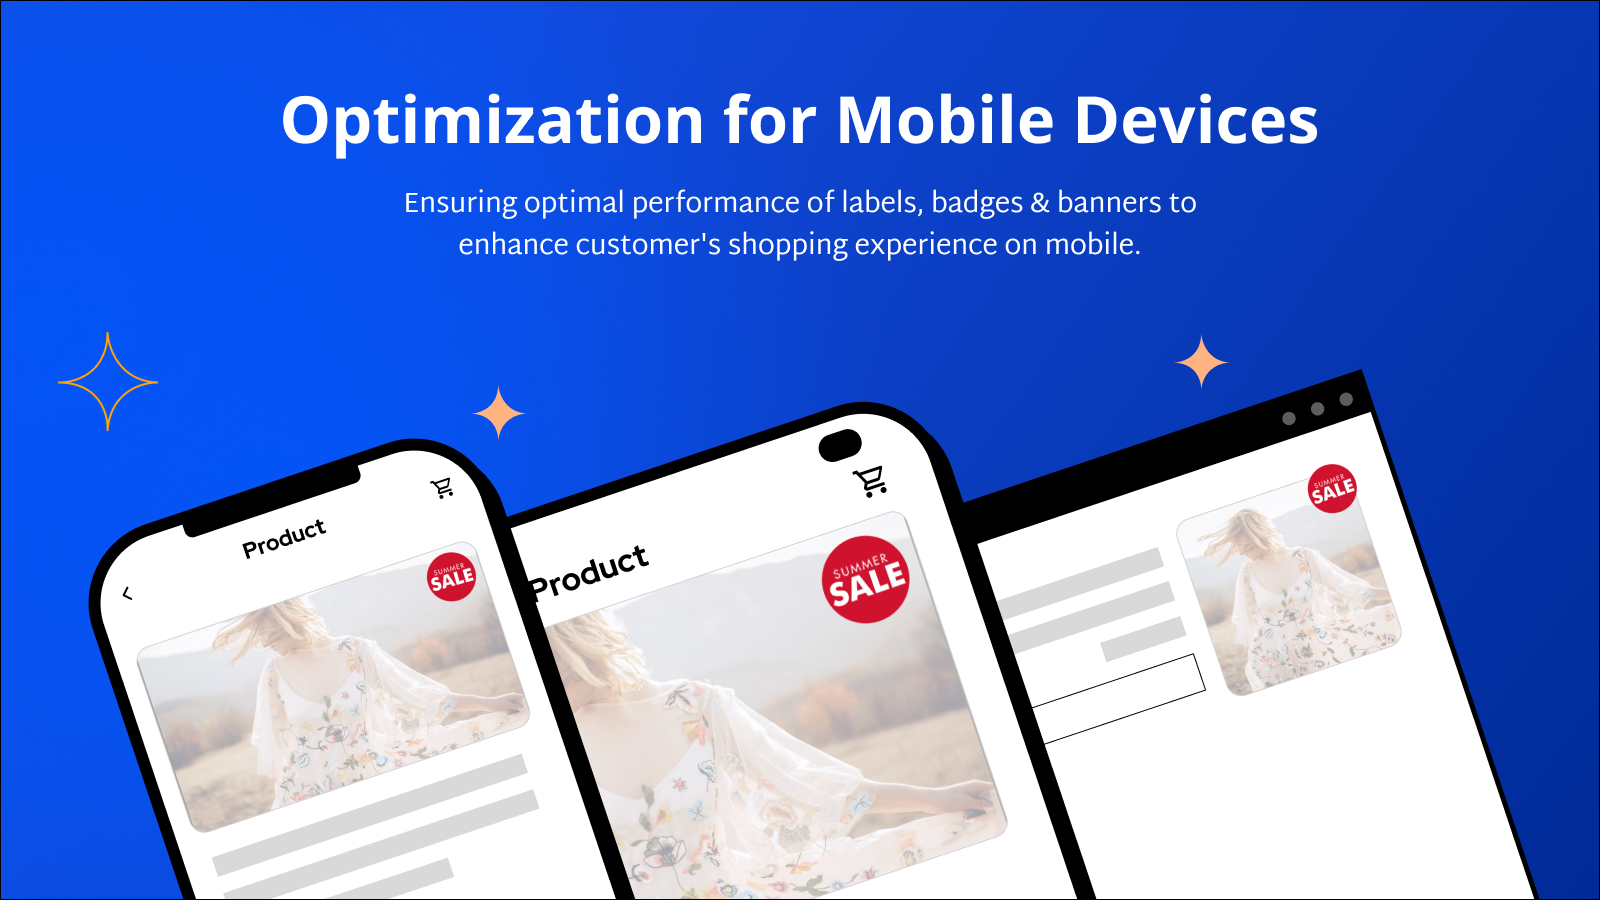 Ensure optimal performance of labels, badges & banners on mobile